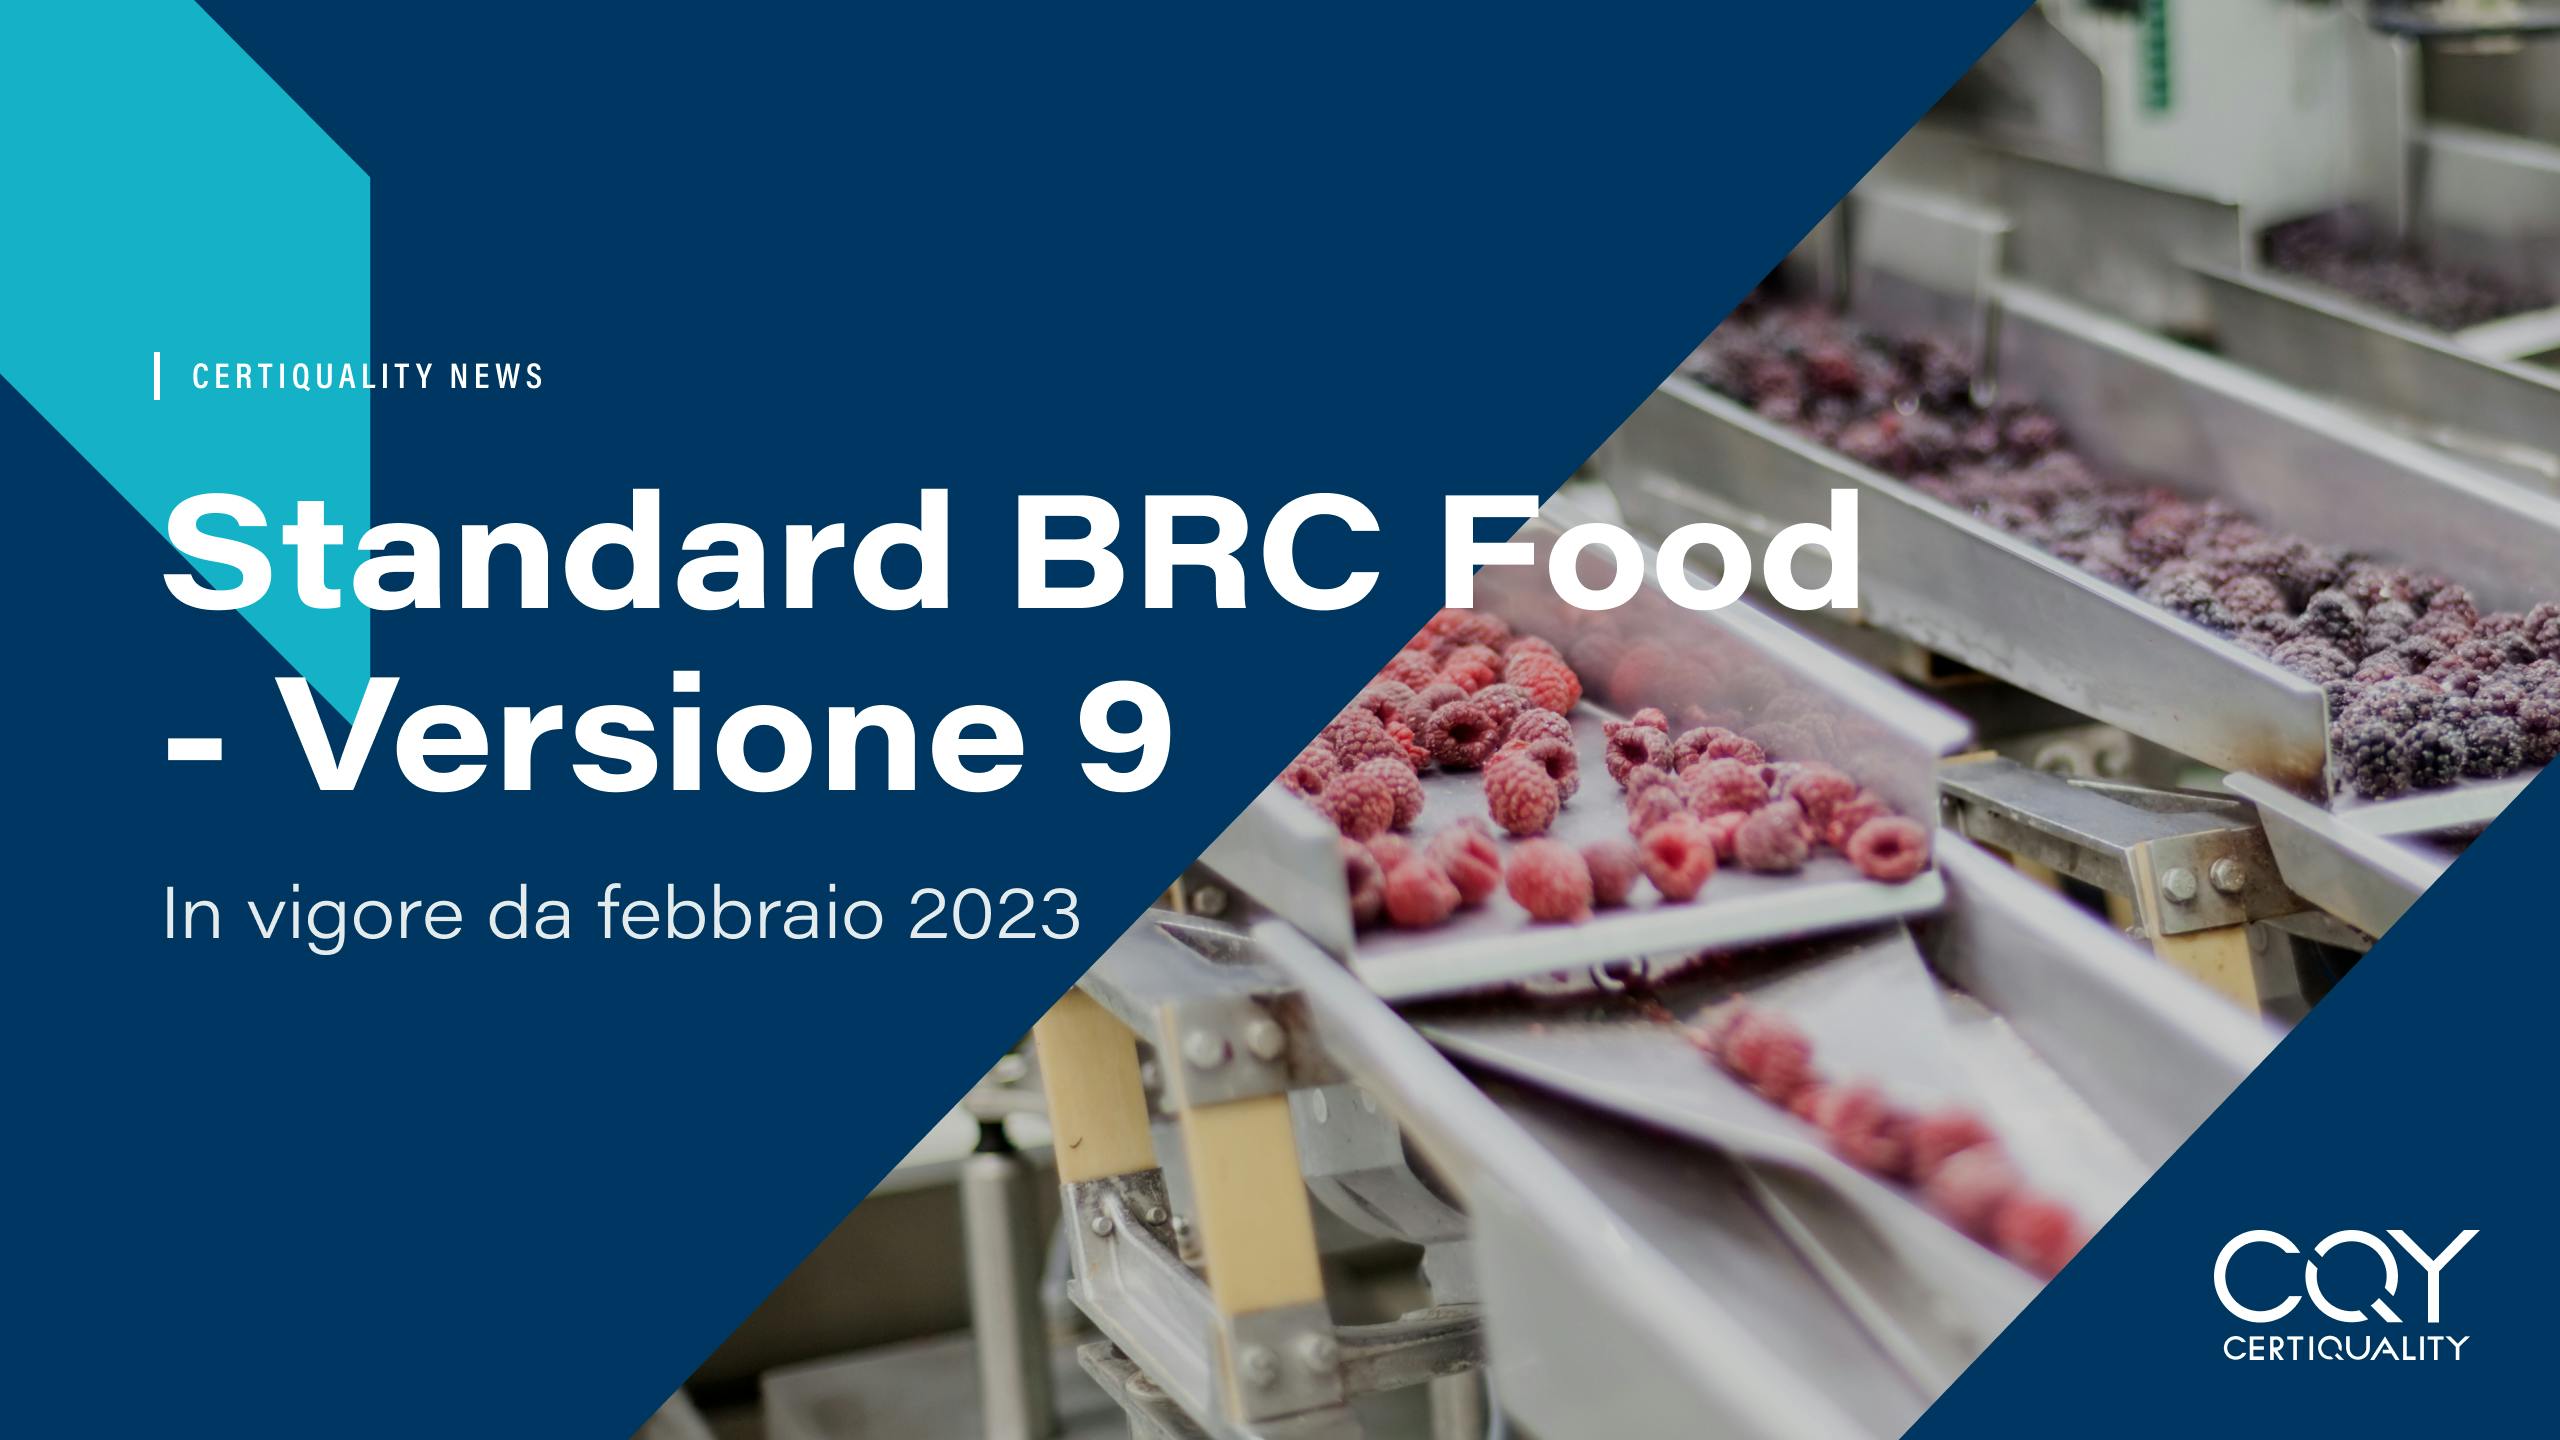 BRCGS – GLOBAL STANDARD FOOD SAFETY - ISSUE 9